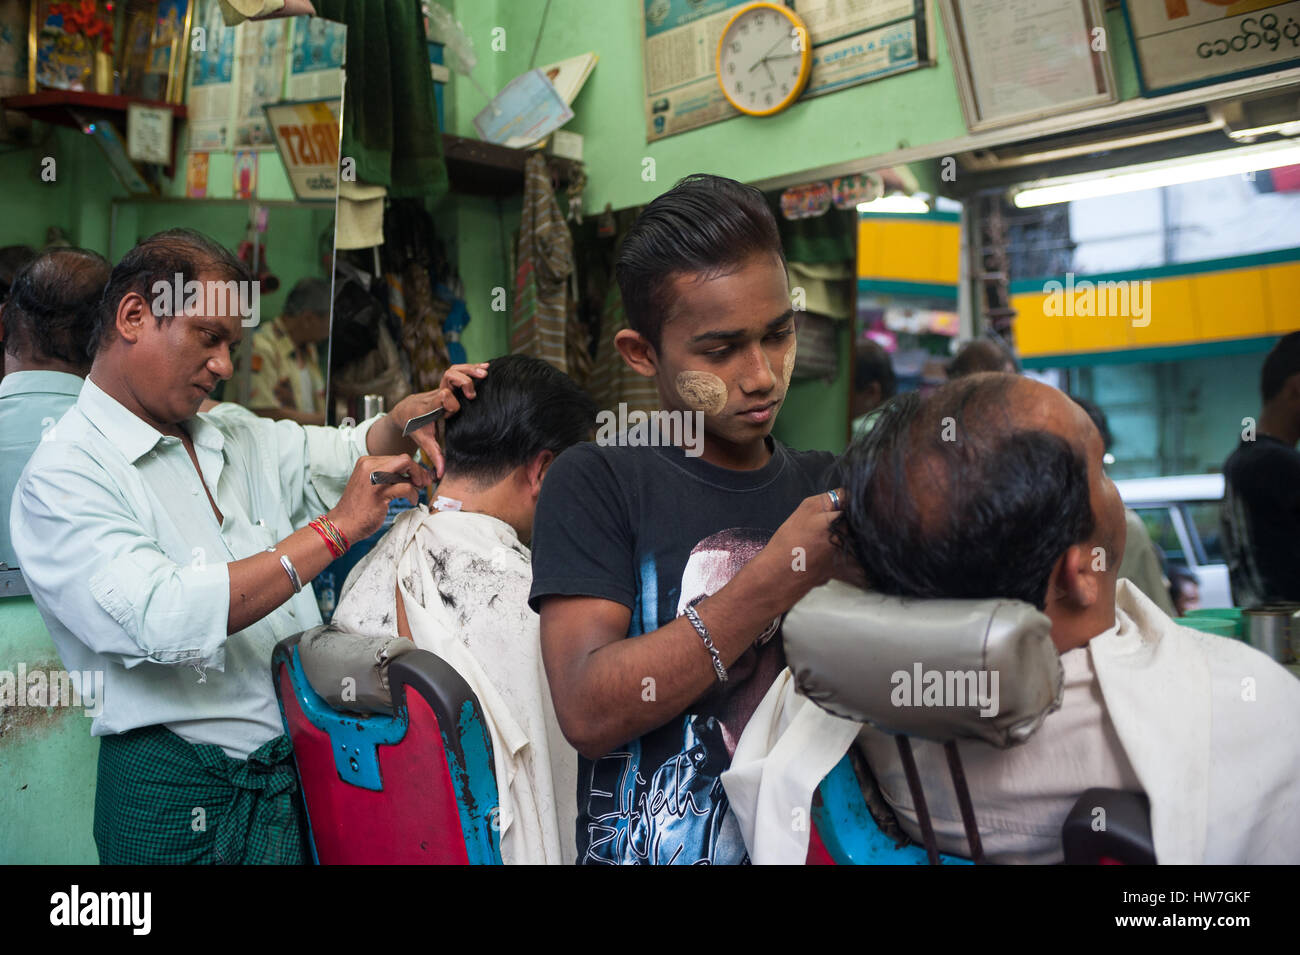 26.01.2017, Yangon, Republic of the Union of Myanmar, Asia - Two barbers are seen cutting the hair of clients in Yangon. Stock Photo